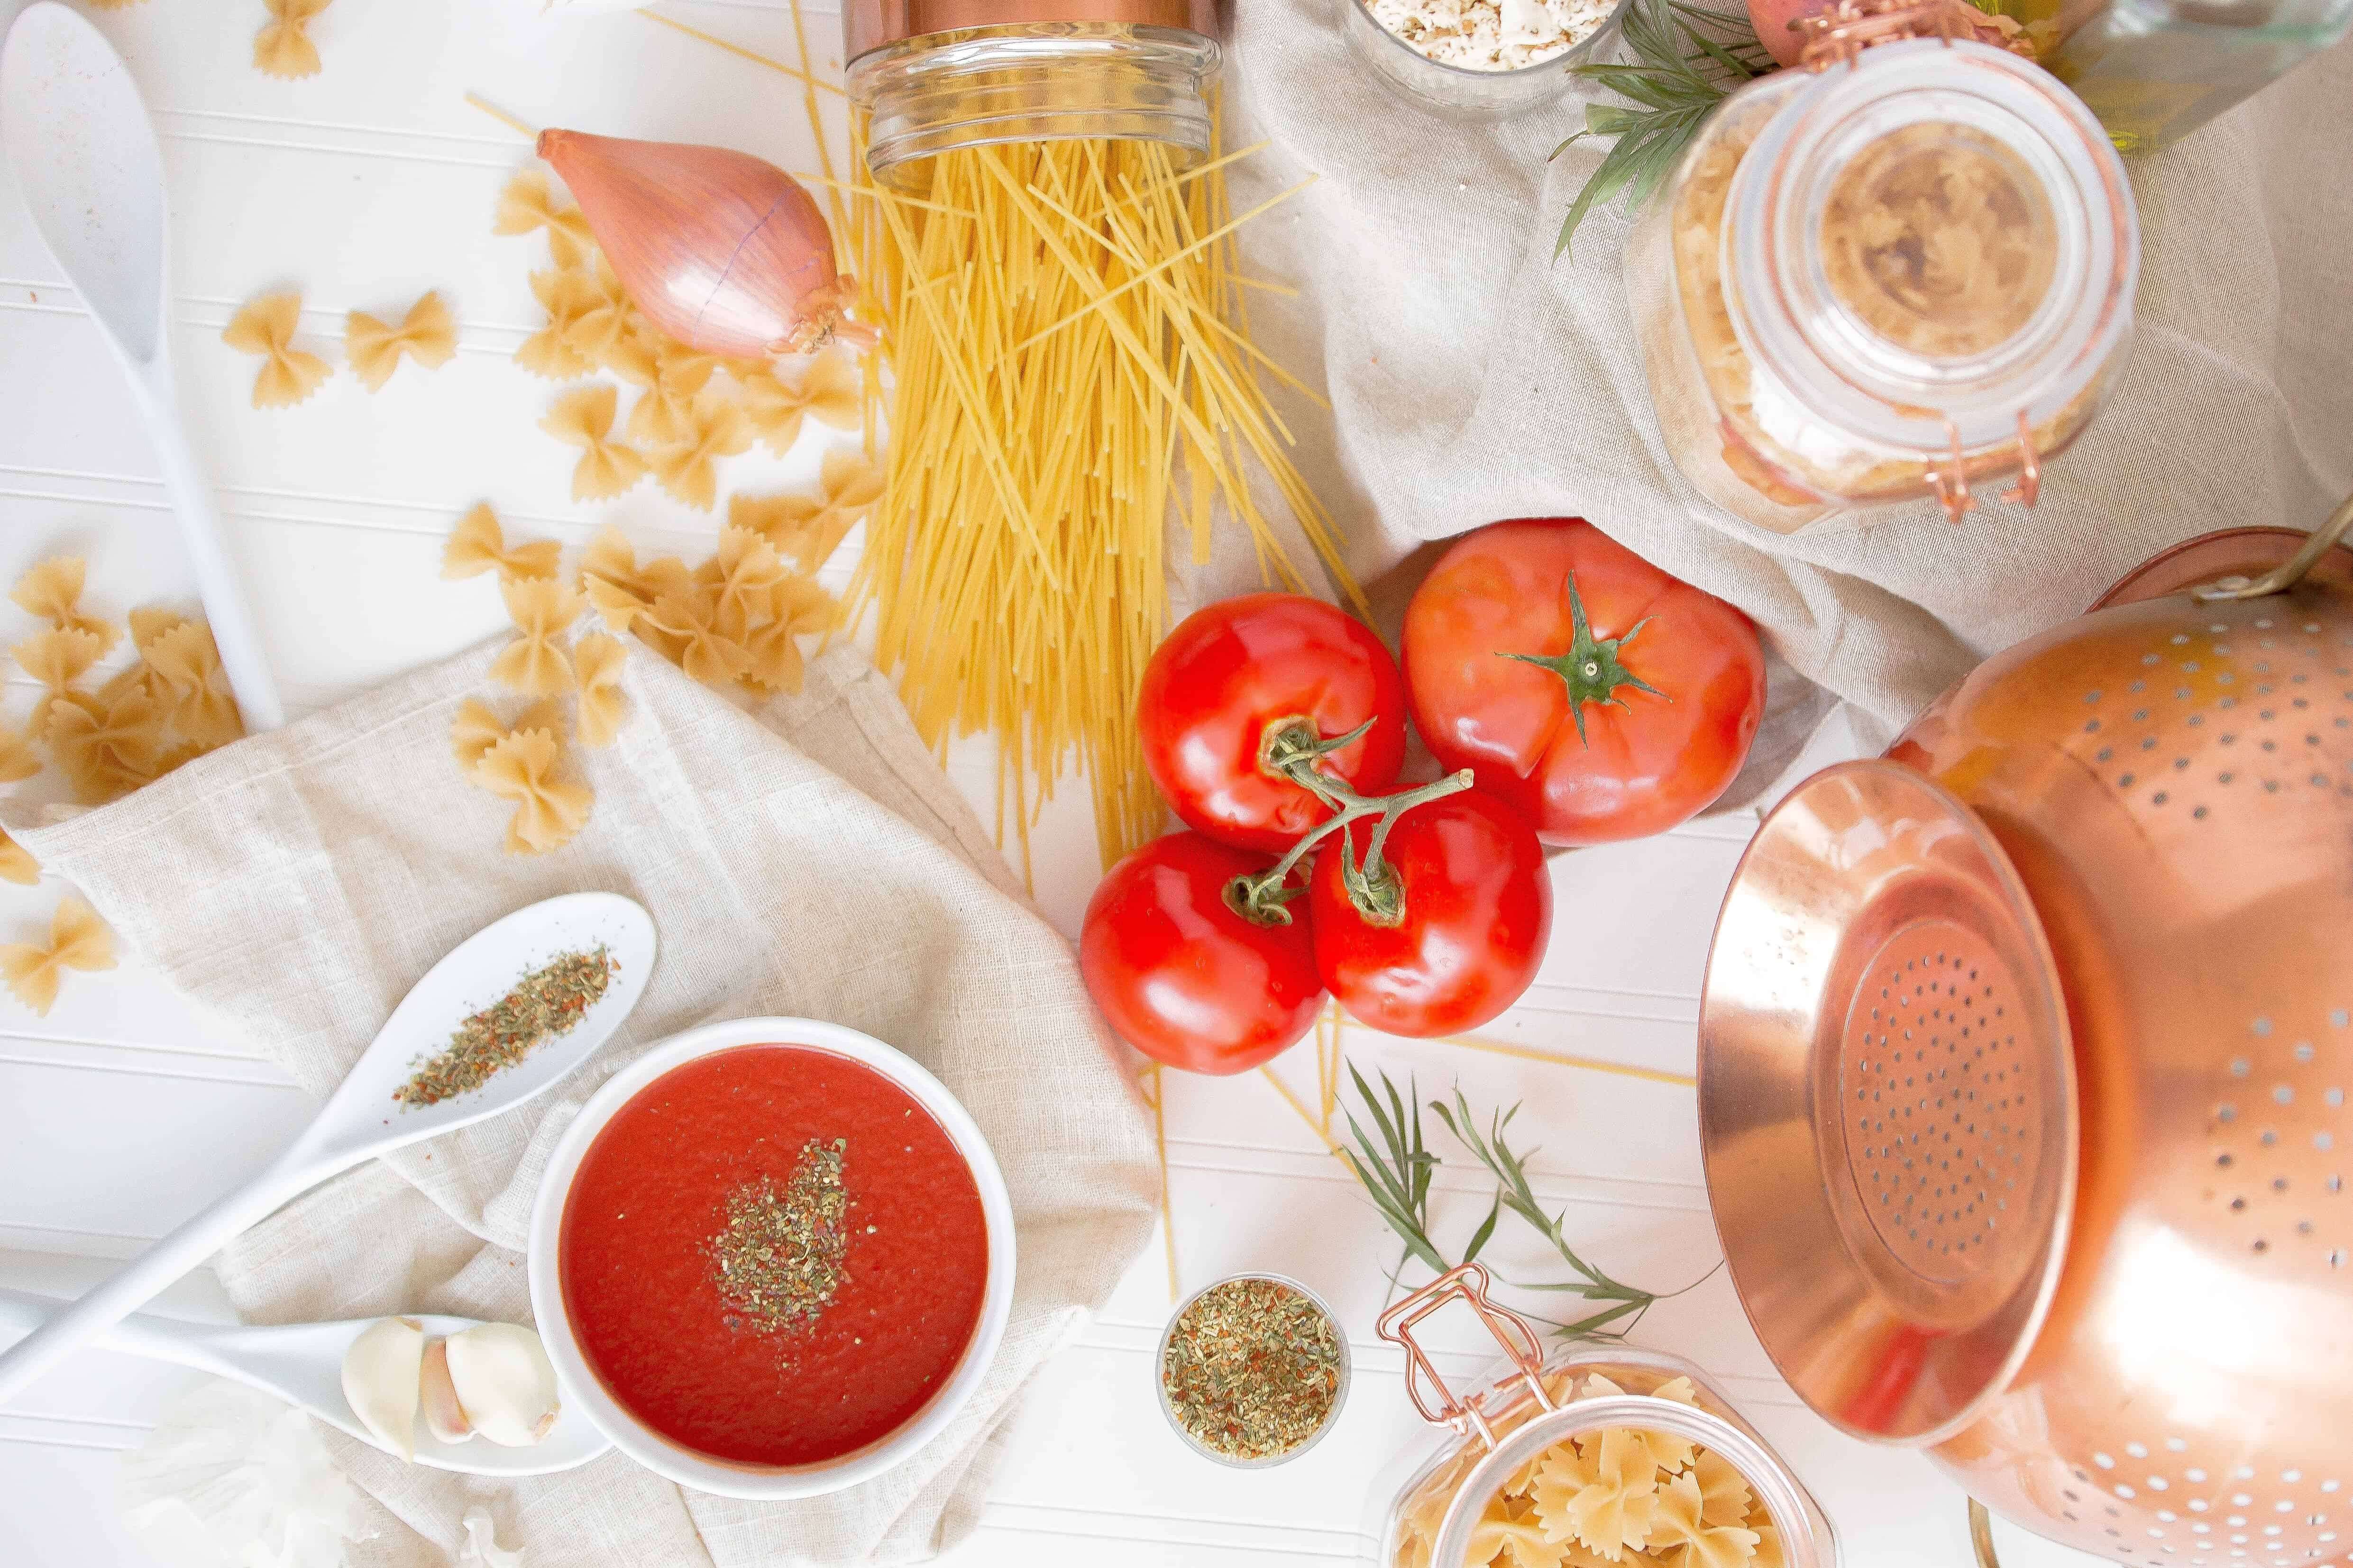 Ingredients and supplies for making pasta scattered on table